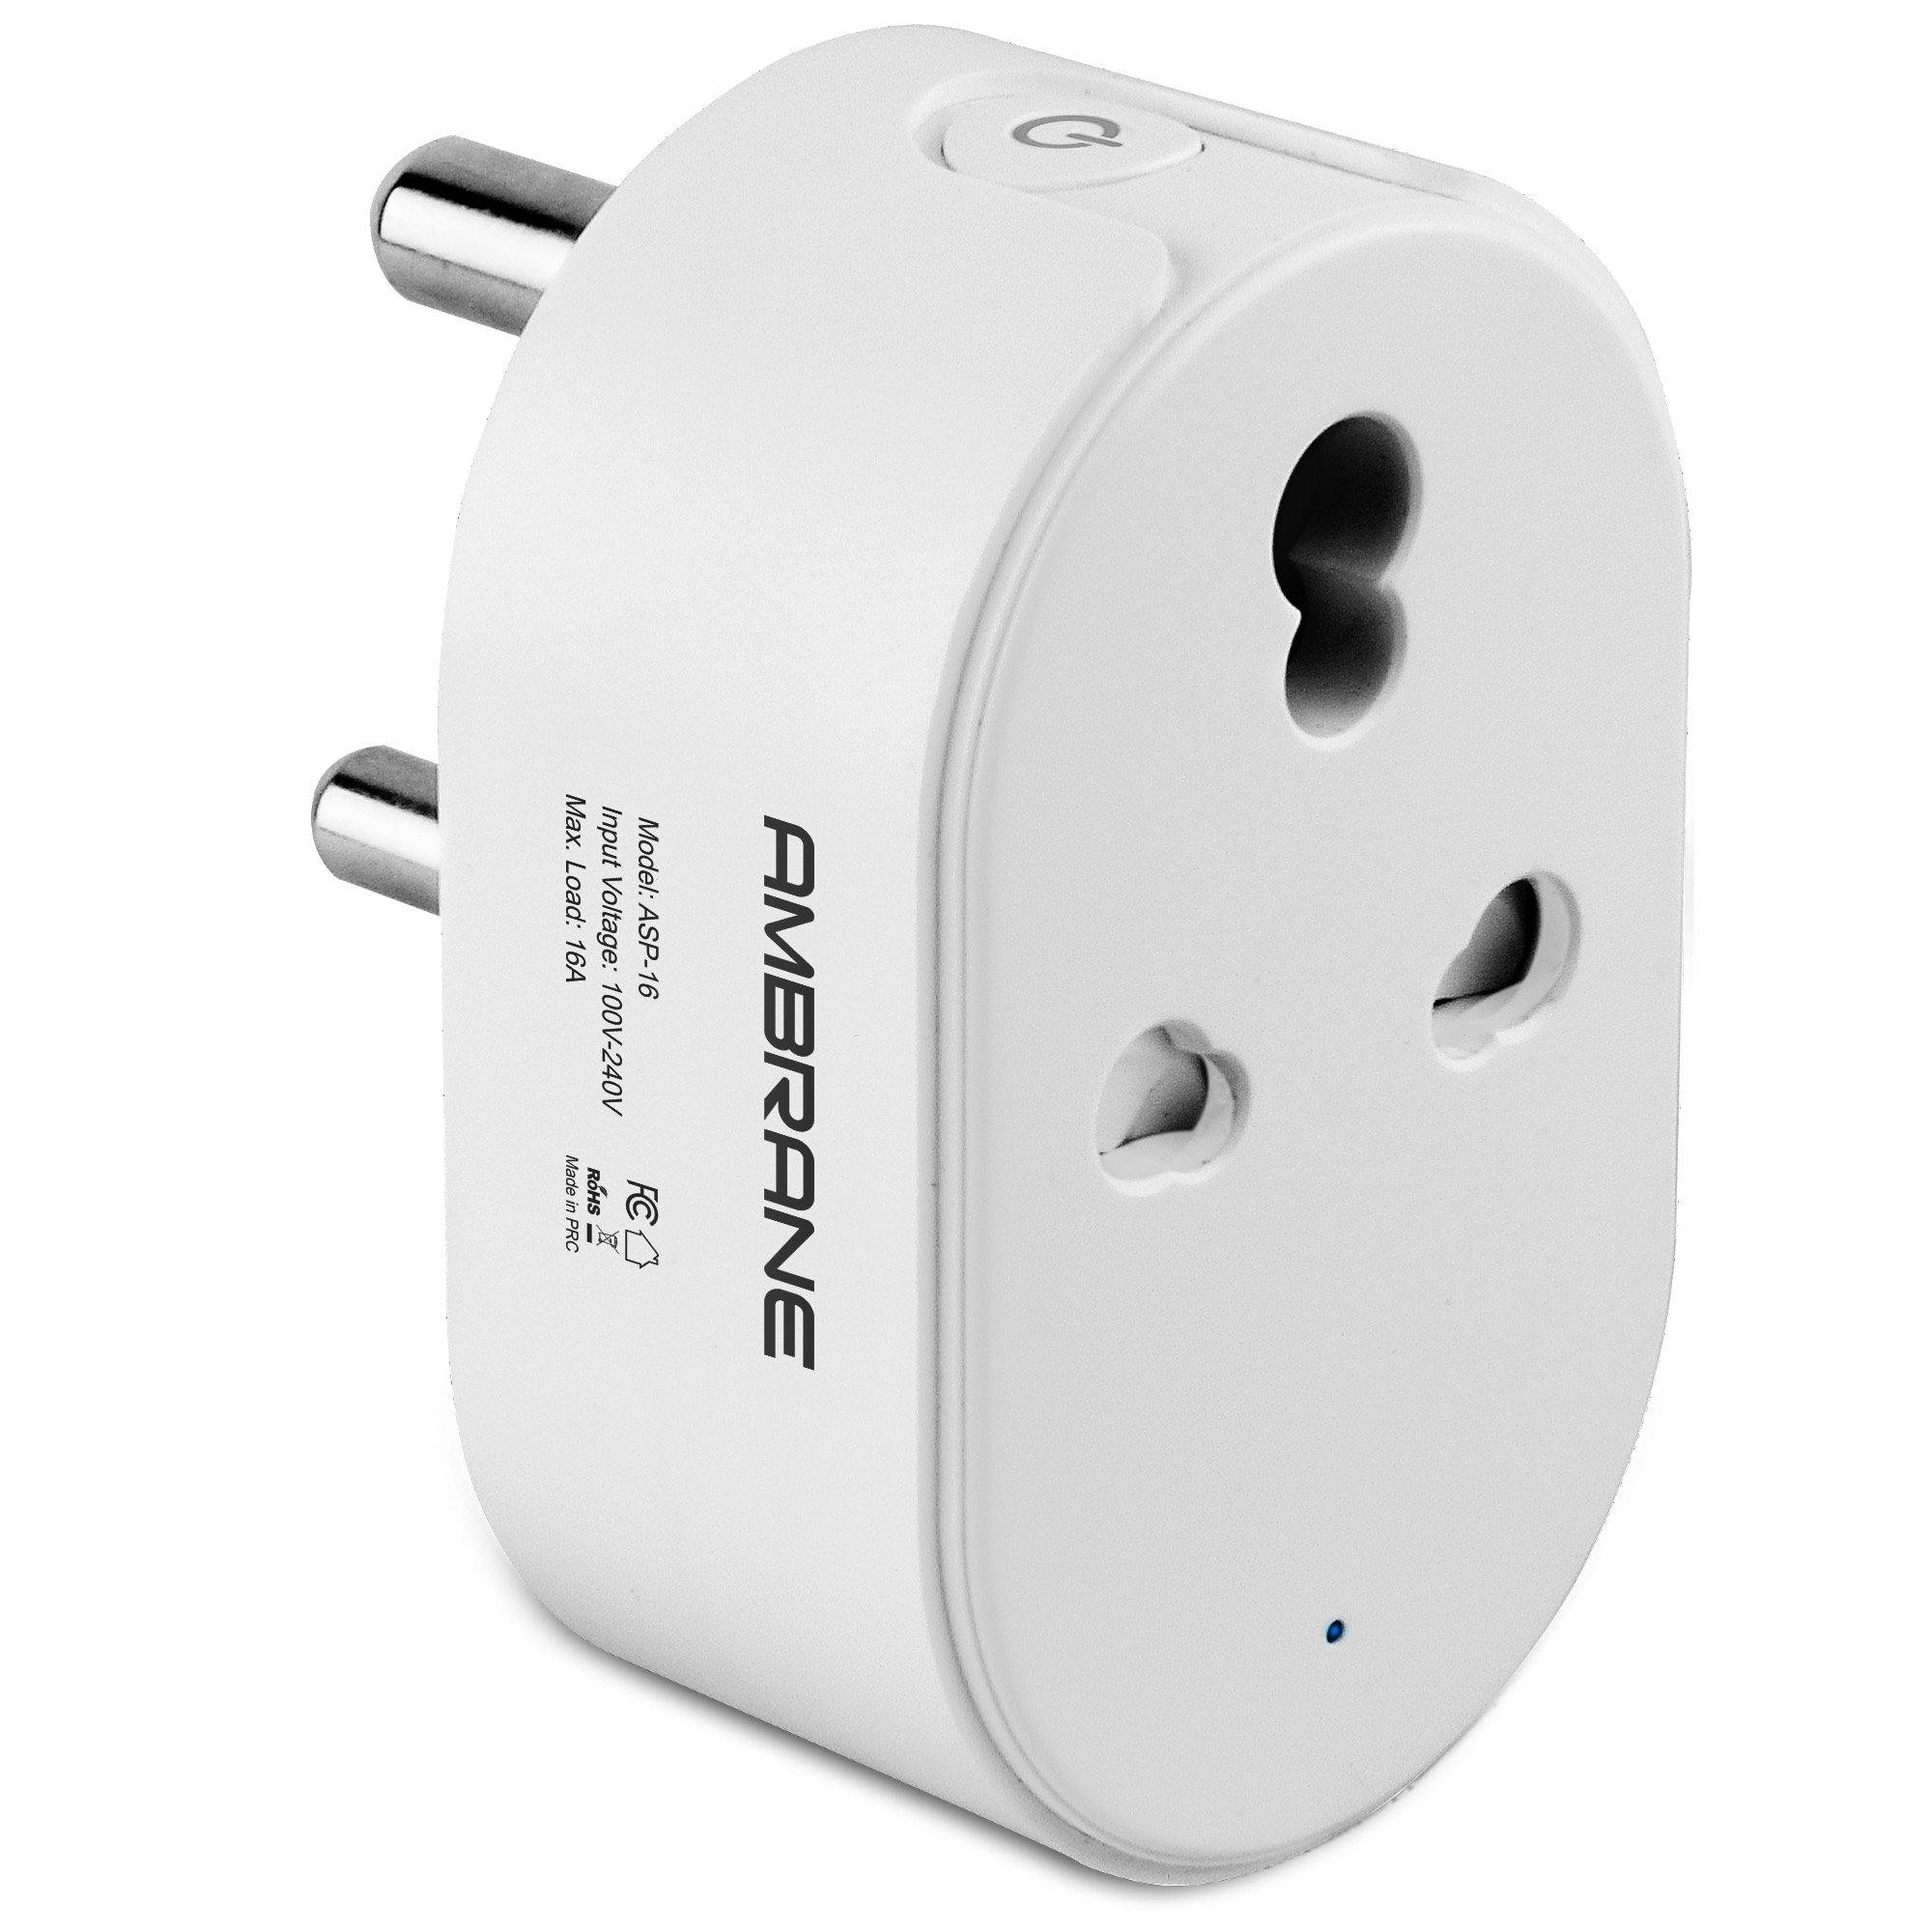 Ambrane WiFi Smart Plug 16A - Control Your Devices from Anywhere, No Hub Required, Works with Amazon Alexa and Google Assistant (ASP-16, White) - AmbraneIndia